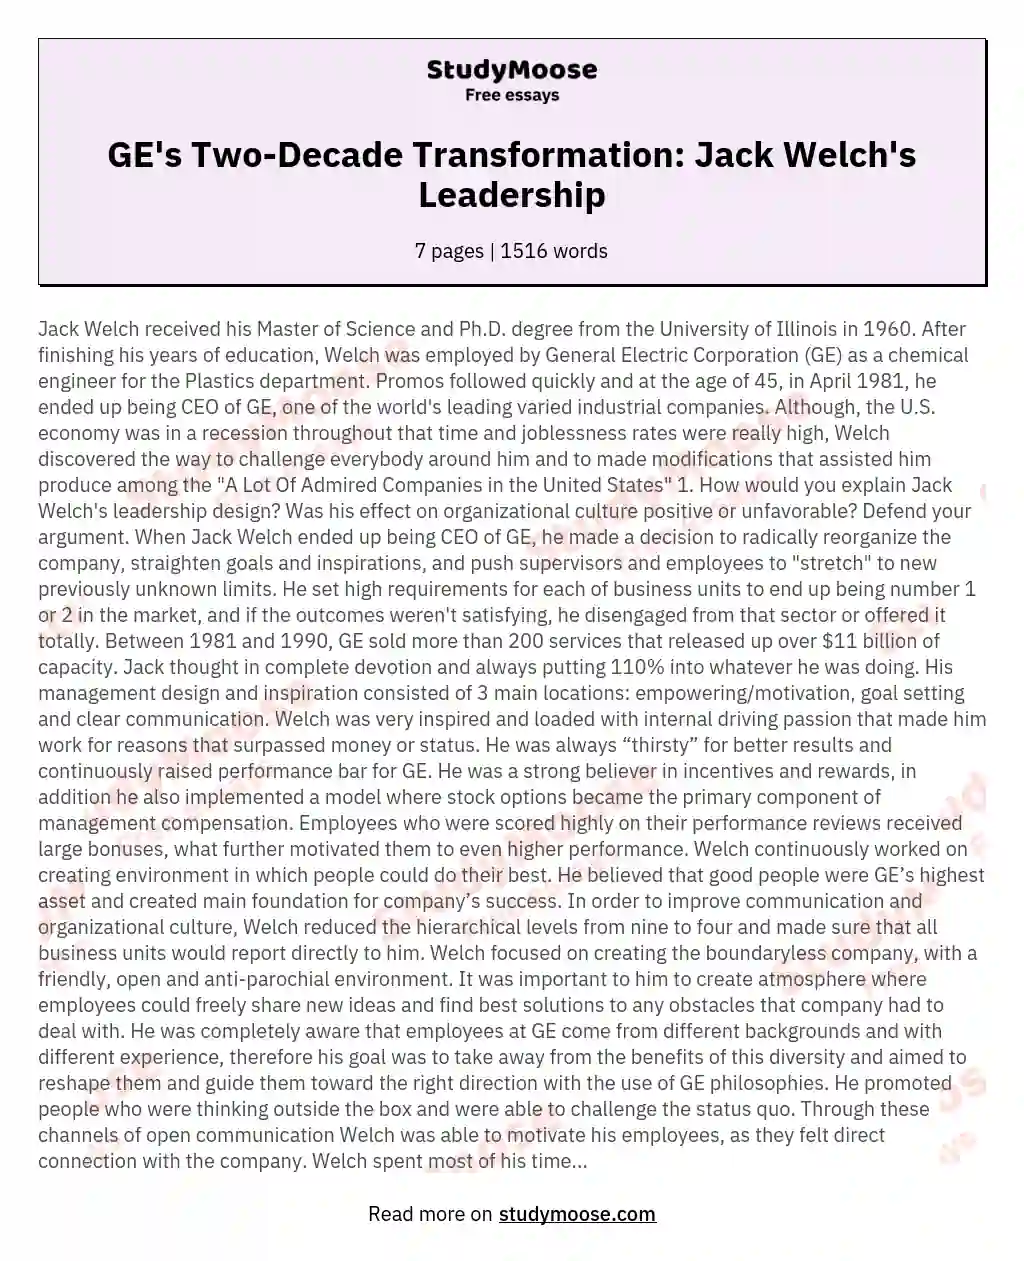 GE's Two-Decade Transformation: Jack Welch's Leadership